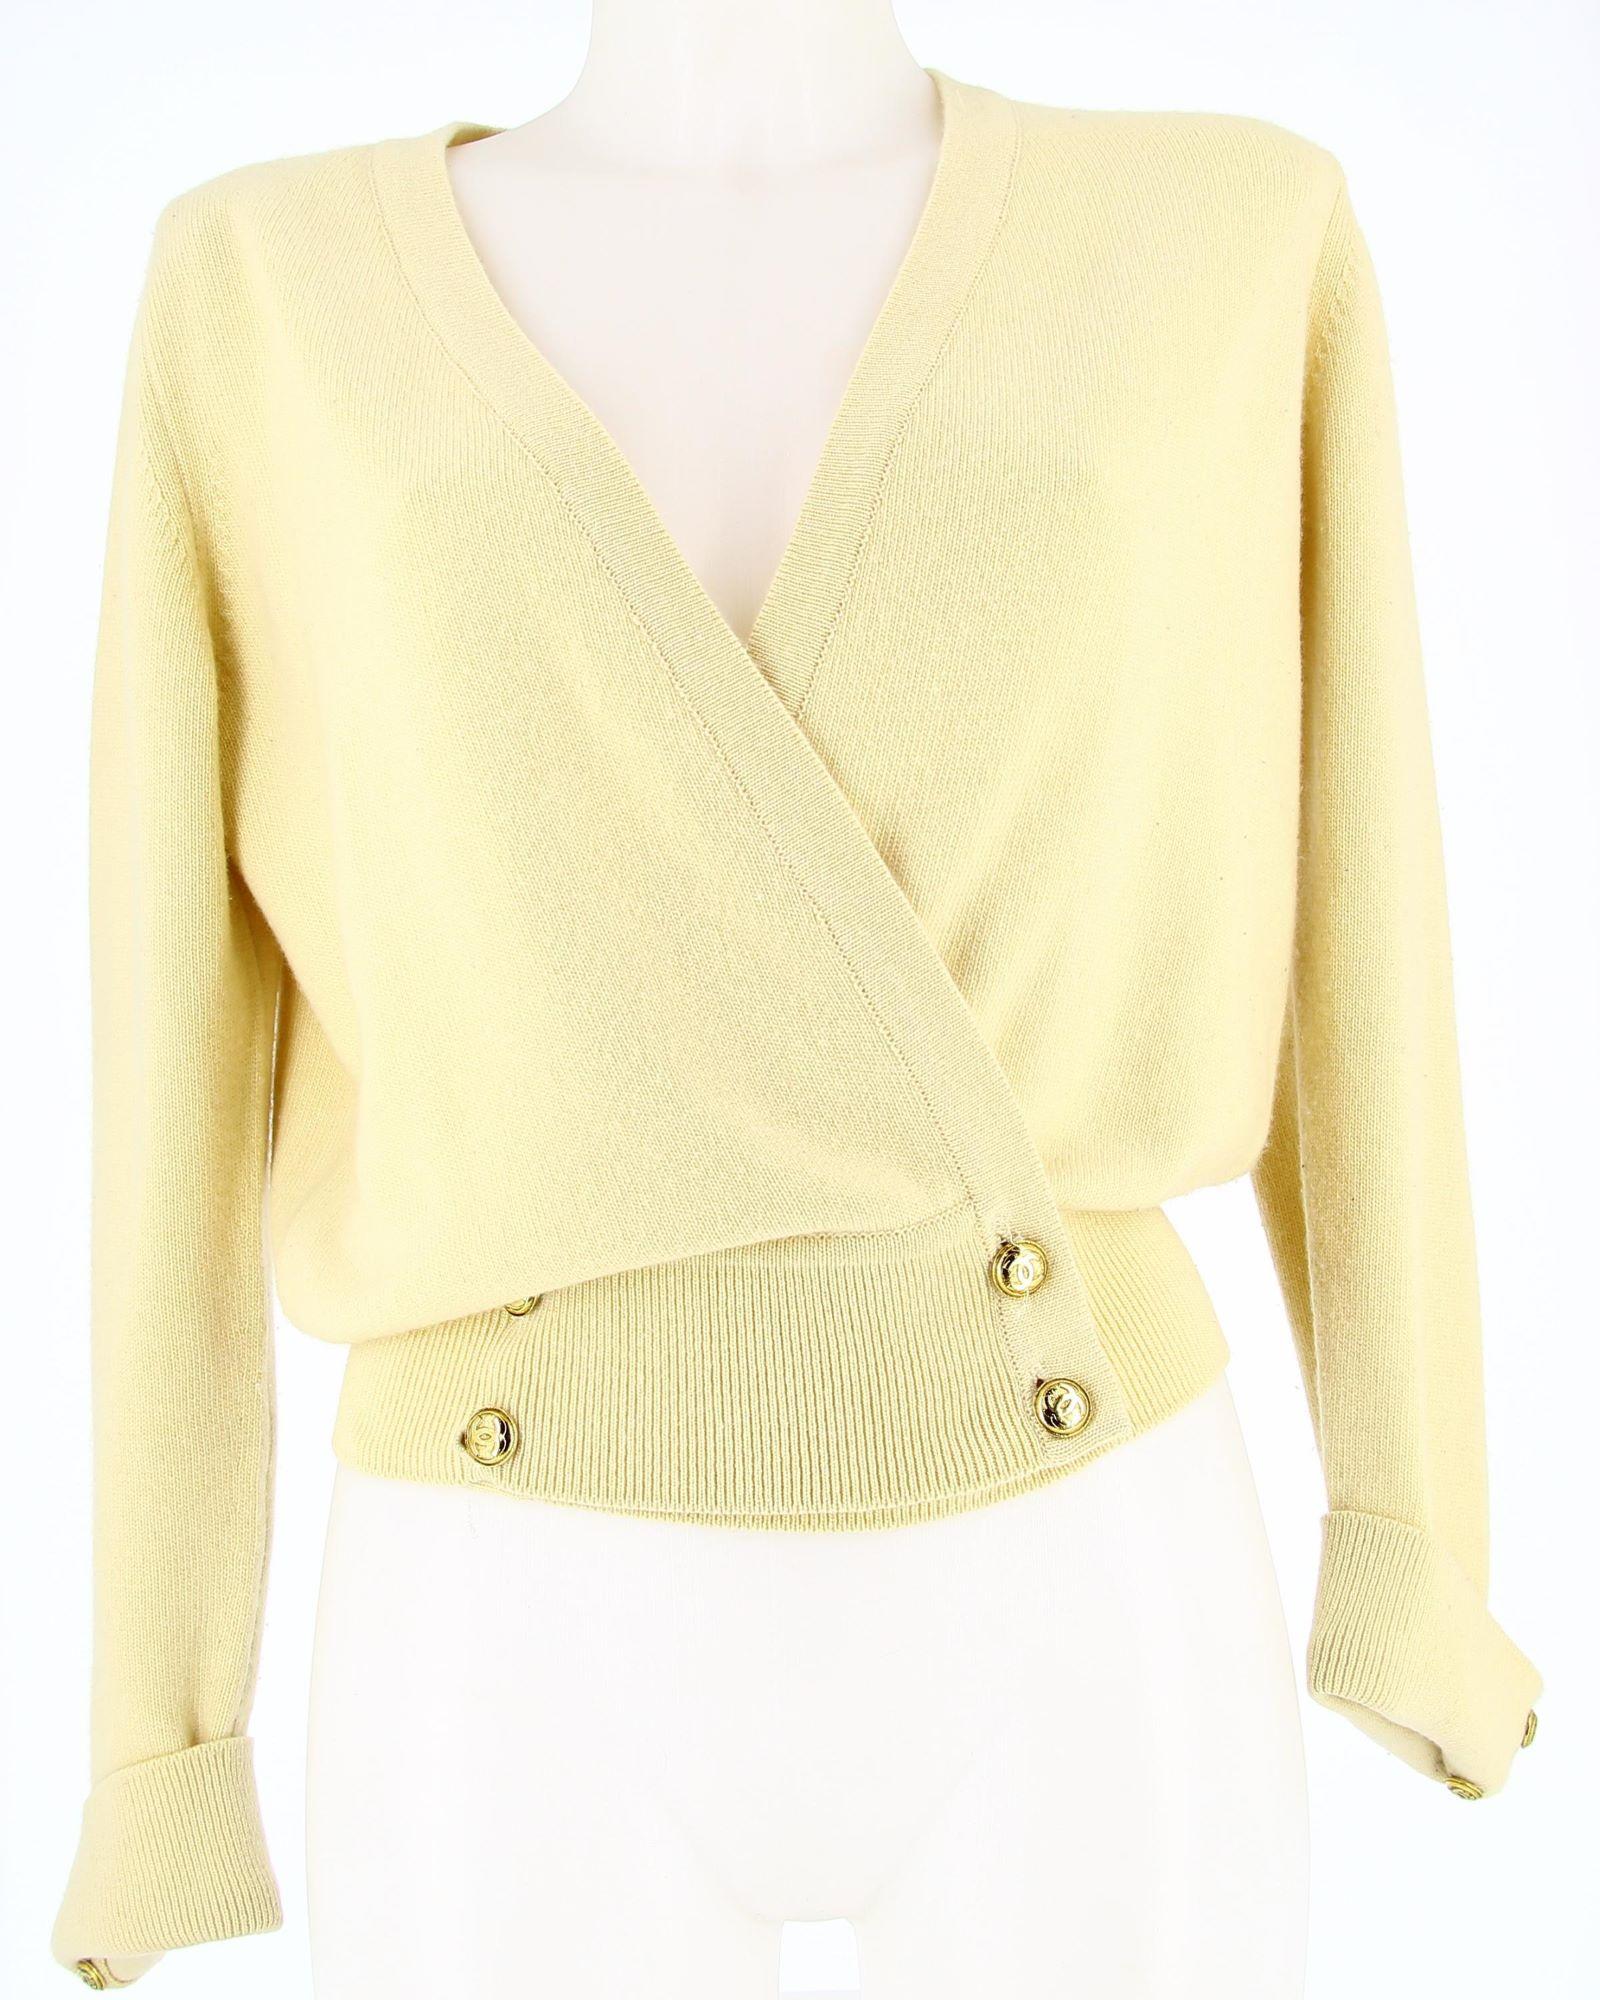 Women's or Men's Chanel Yellow Cashmere Cardigan